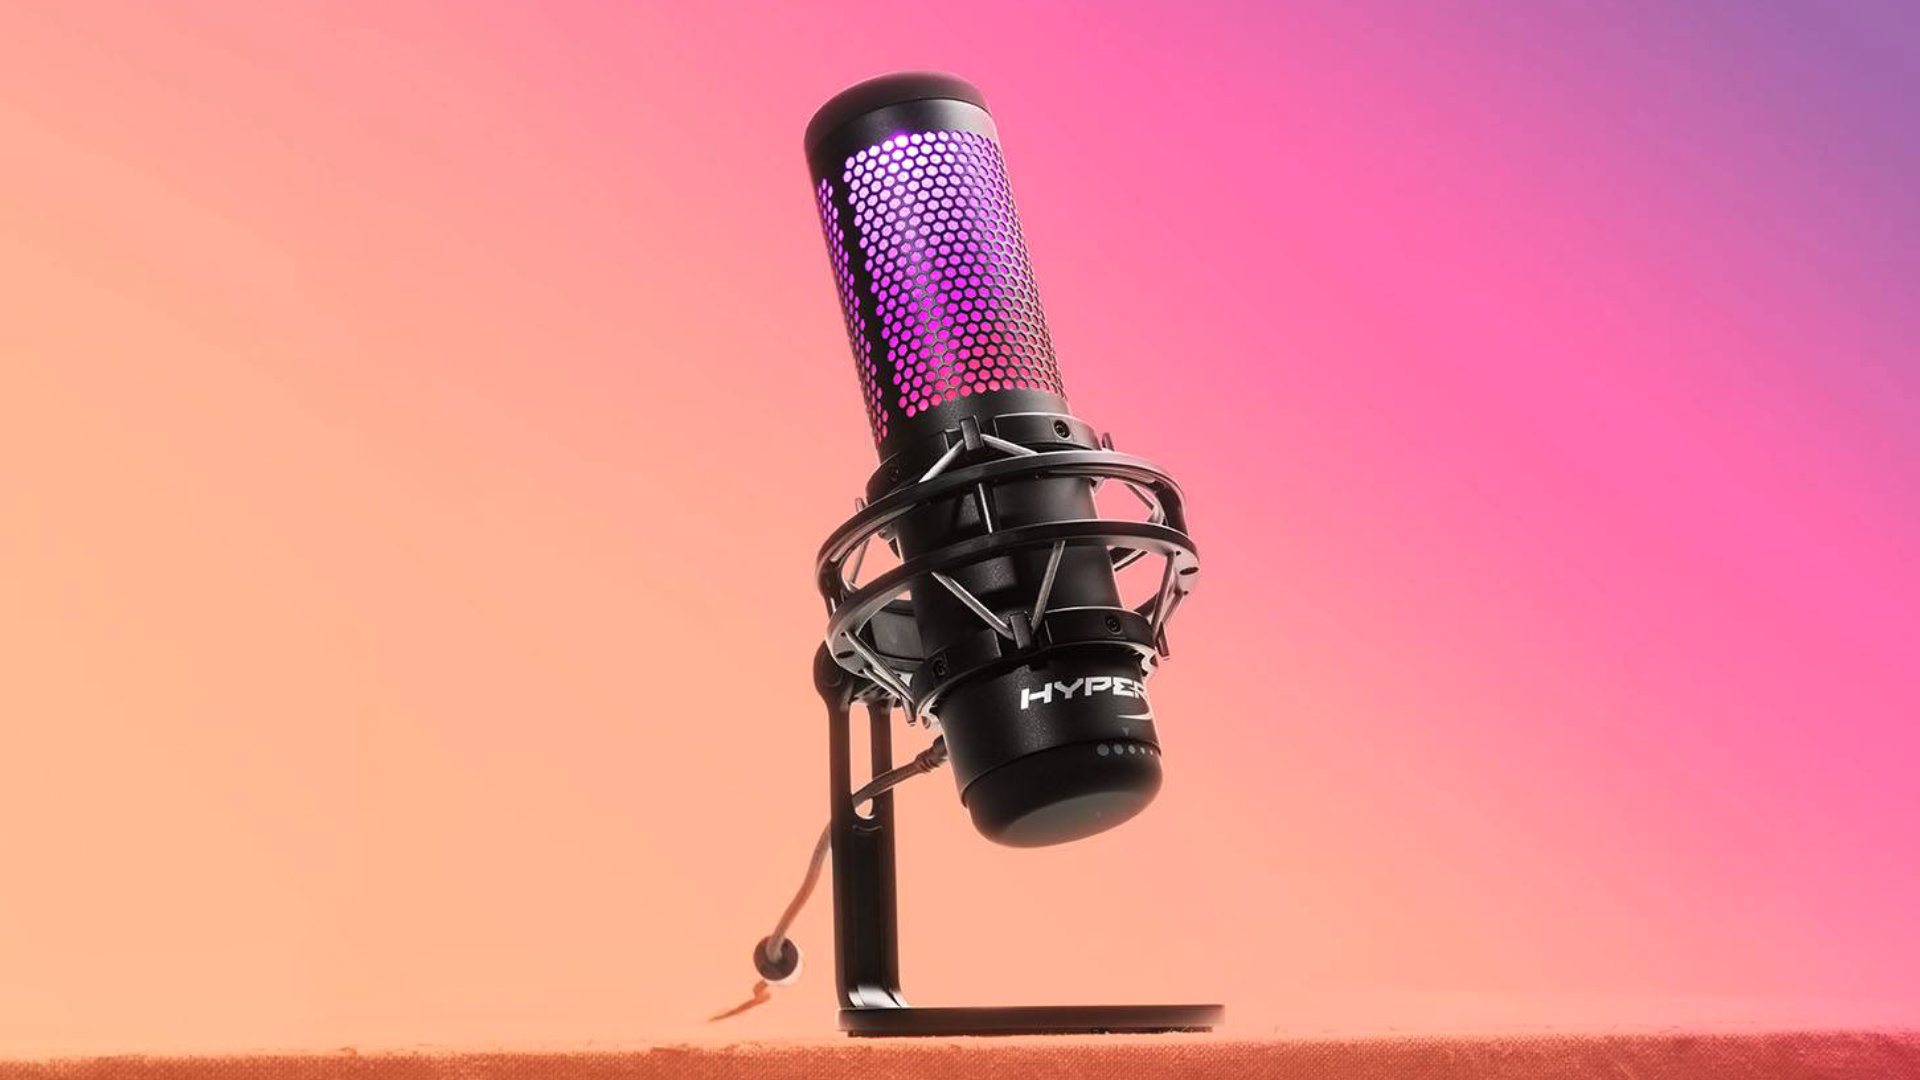 Best gaming microphone: the HyperX QuadCast S.